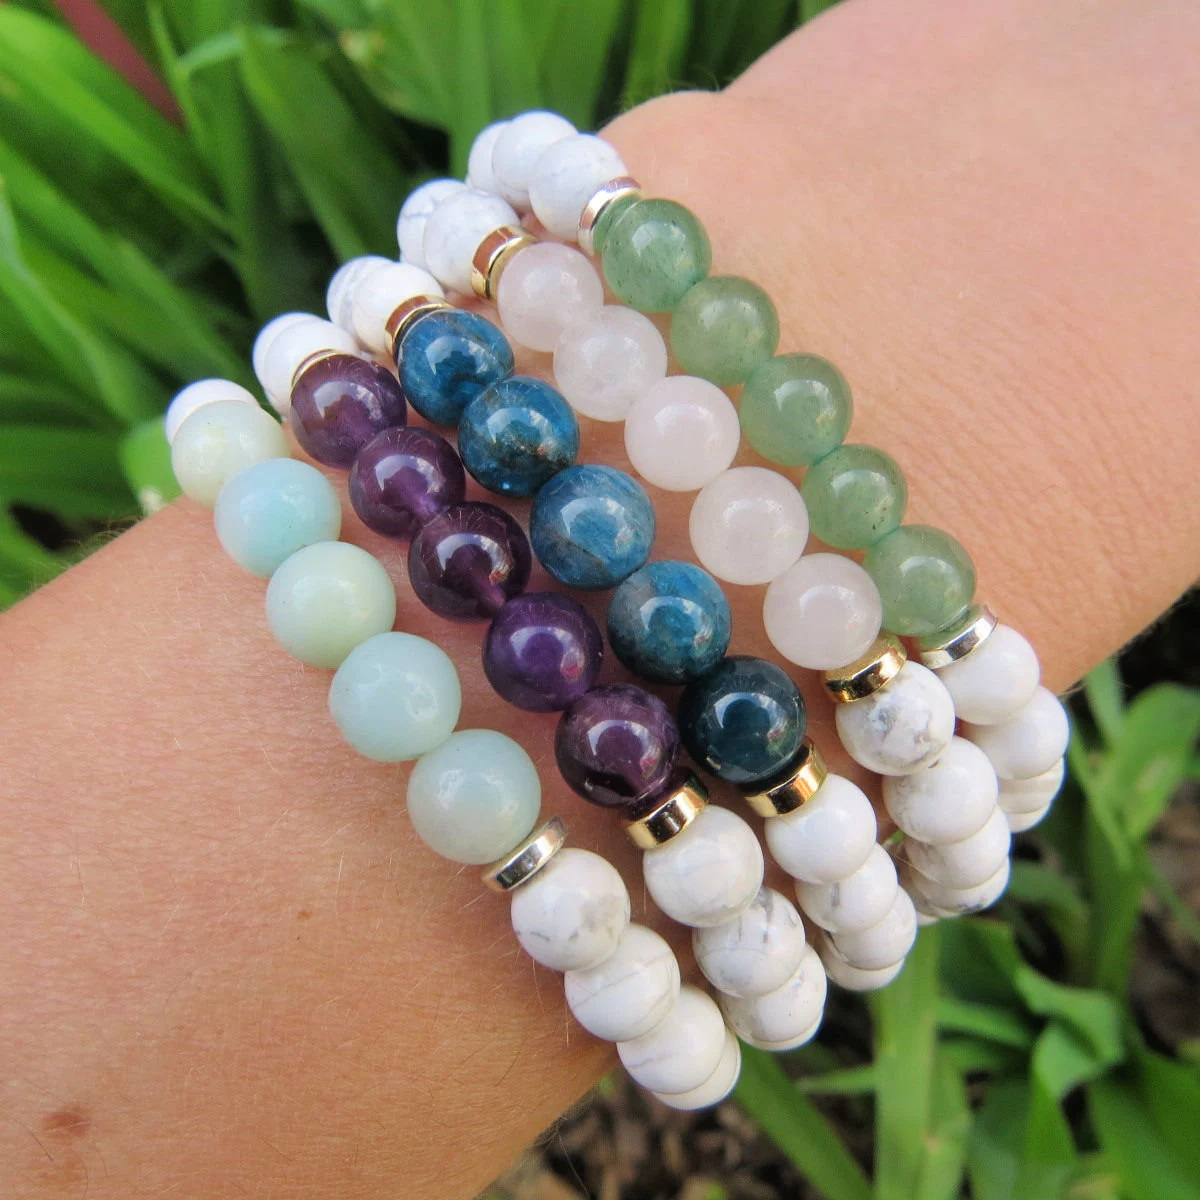 Stone bead bracelets have become popular accessories that not only add a touch of style to an outfit but also carry symbolic meanings